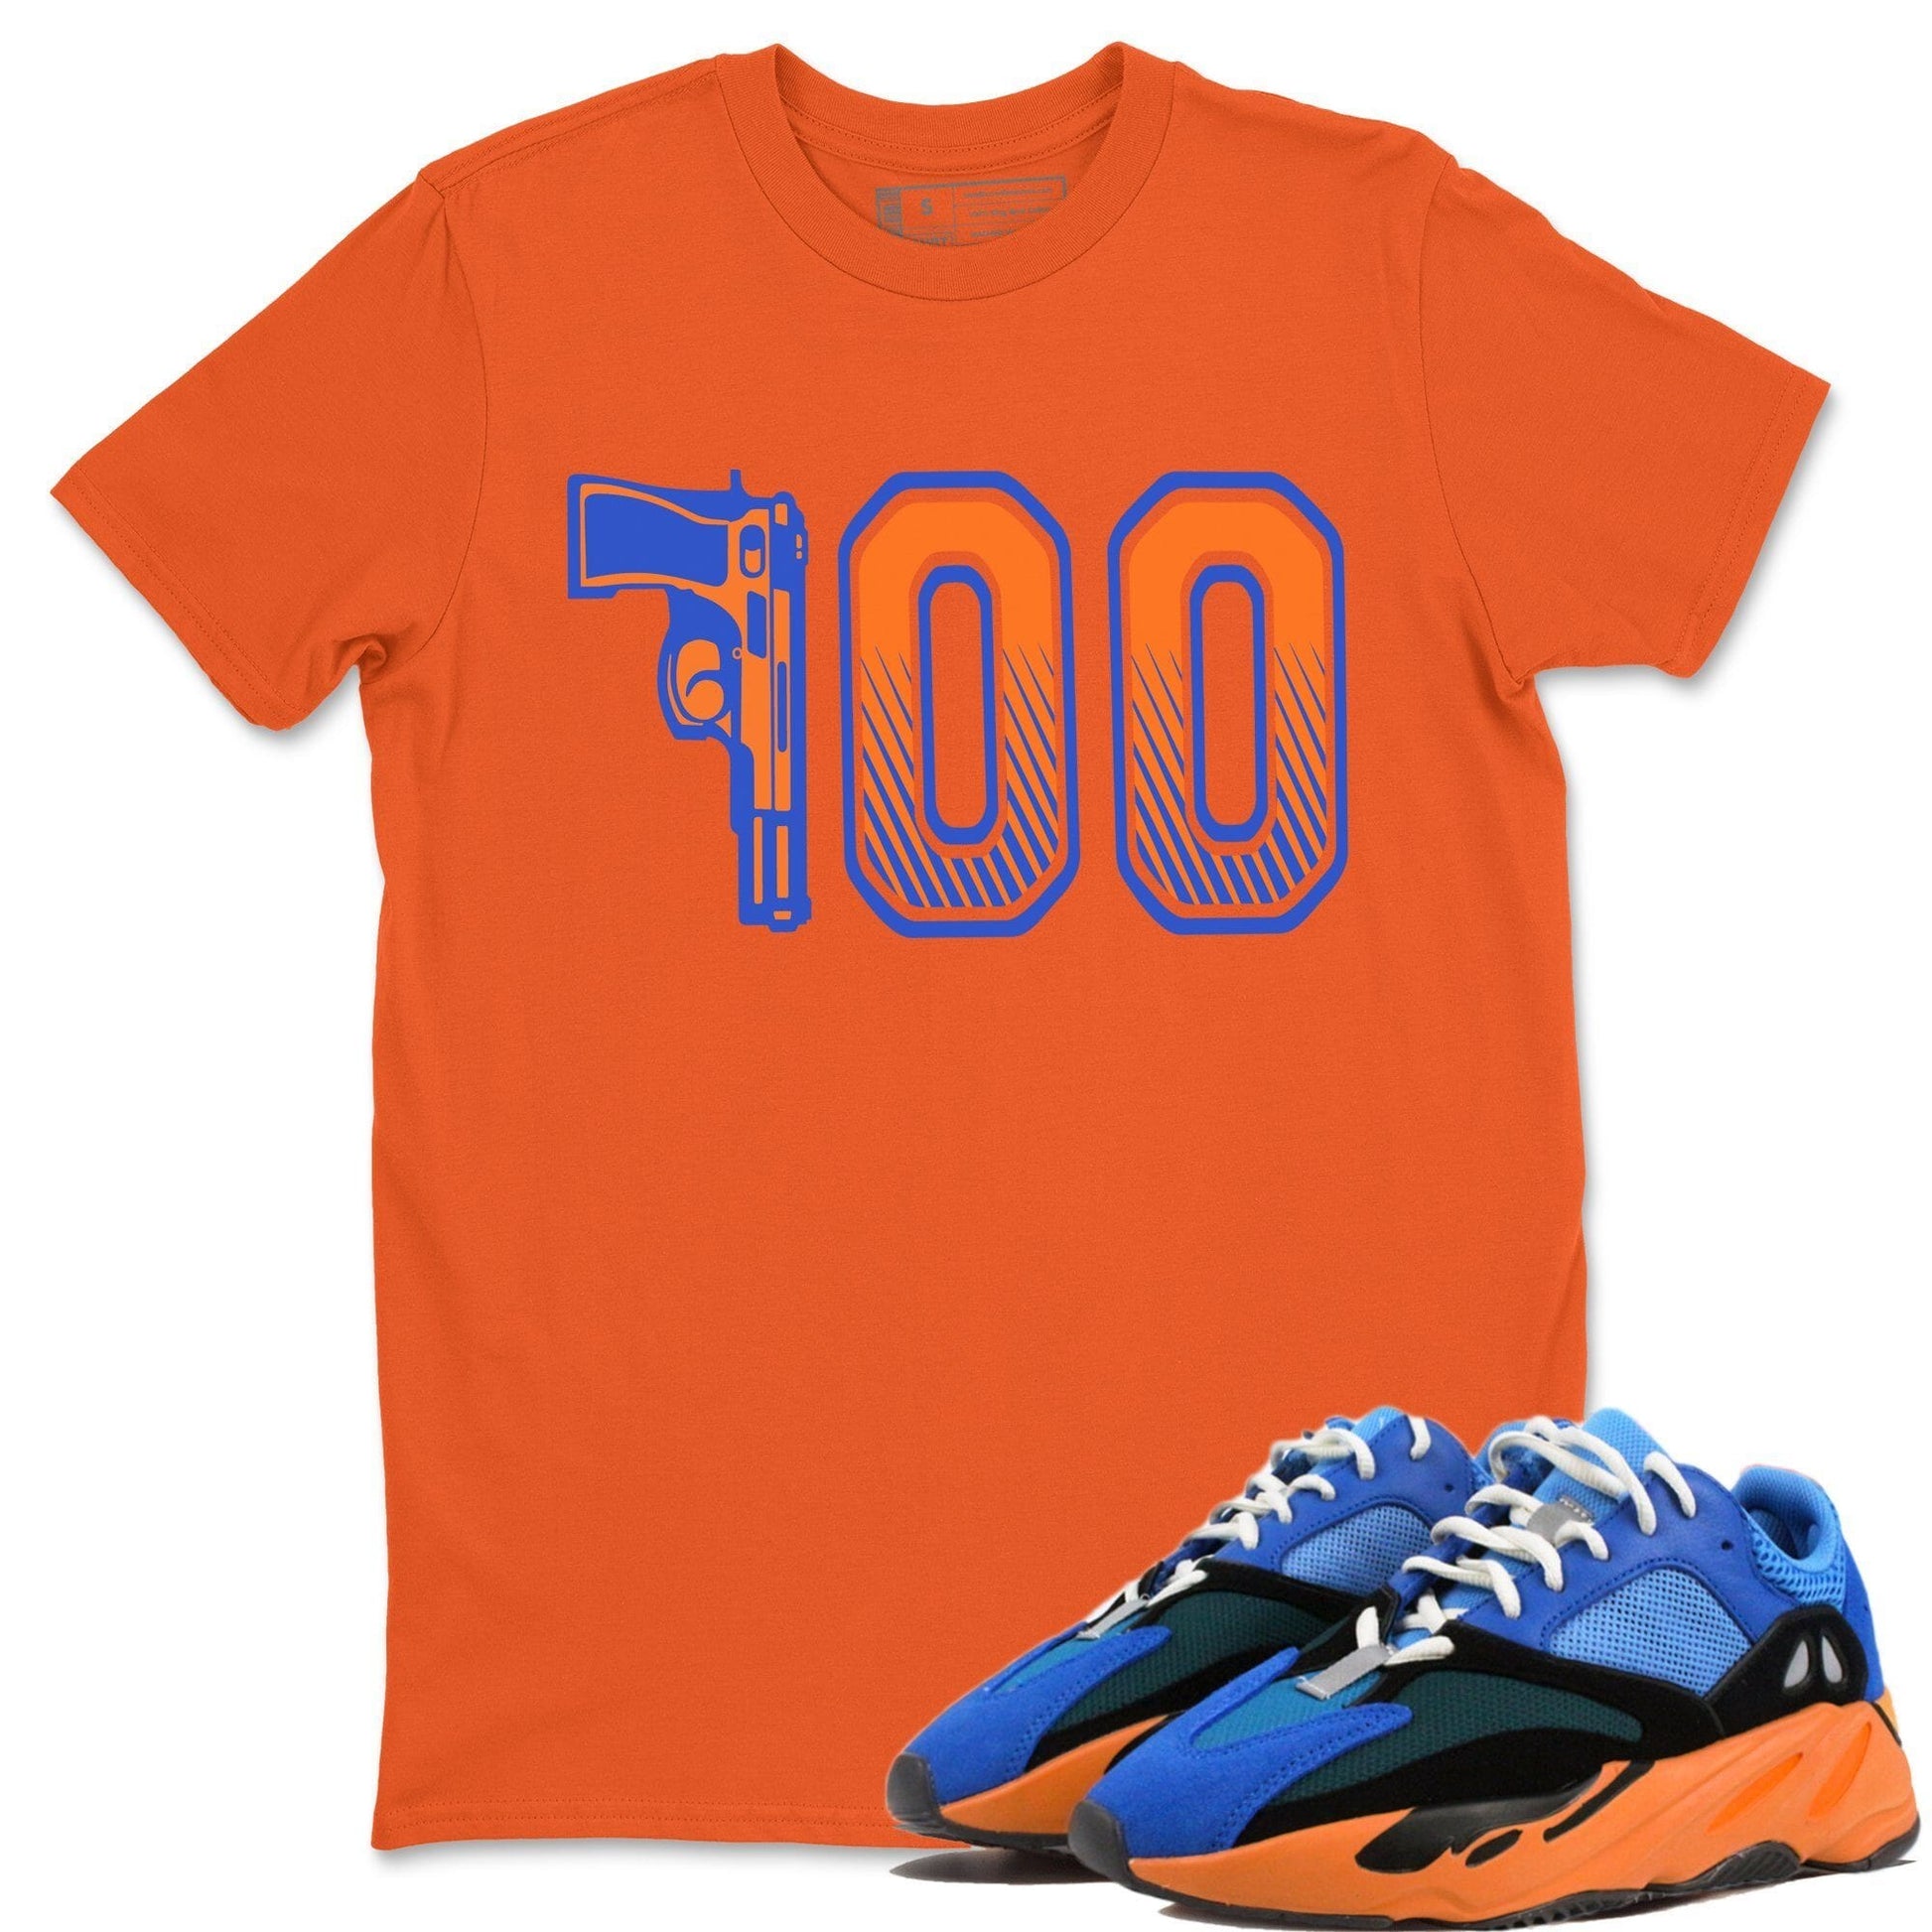 Yeezy 700 Bright Blue Shirt To Match Jordans Number 700 Sneaker Tees Yeezy 700 Bright Blue Drip Gear Zone Sneaker Matching Clothing Unisex Shirts